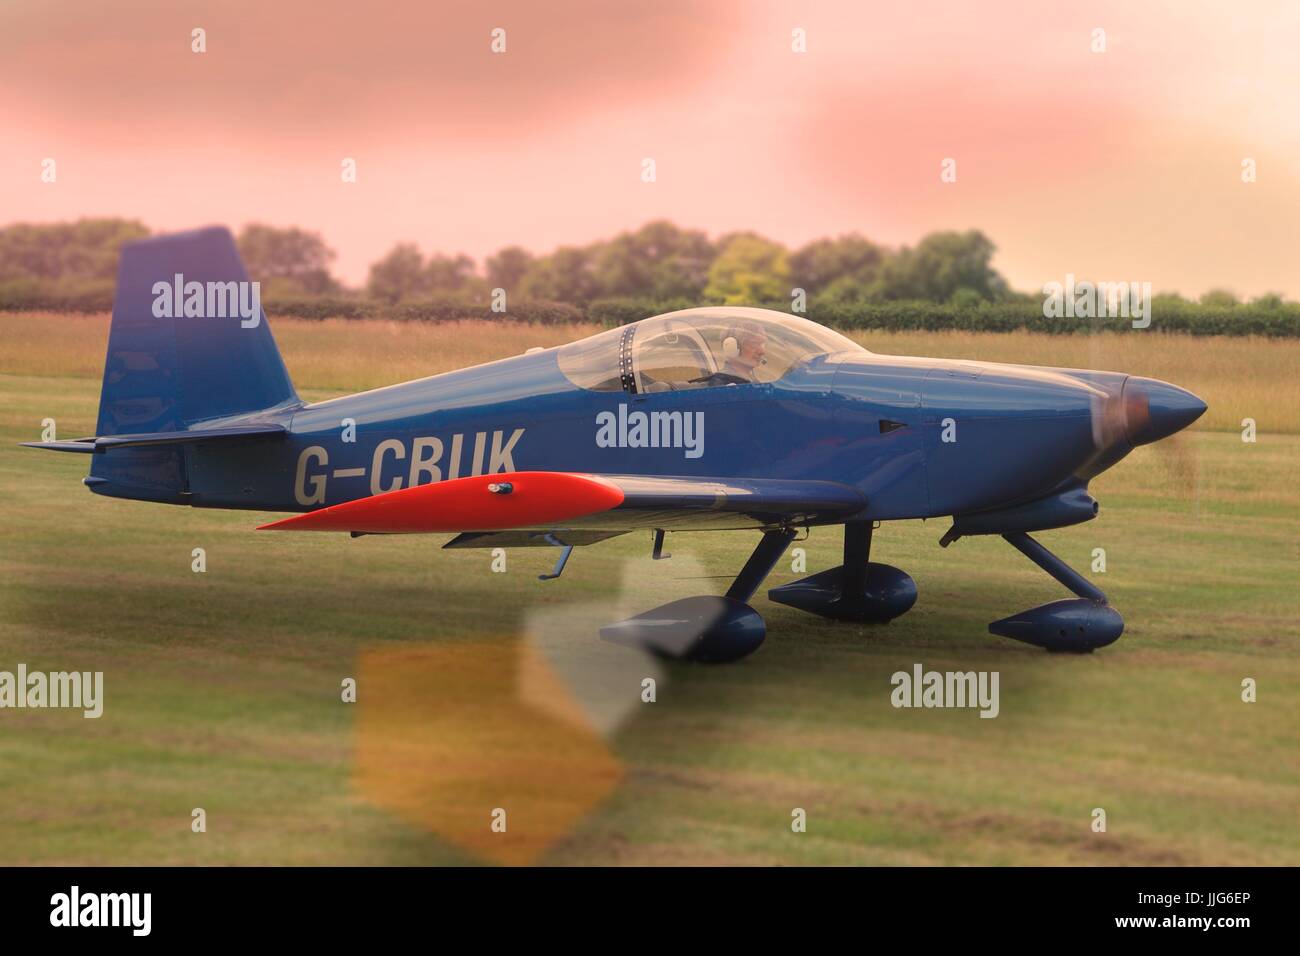 A VANS RV-6A hand built  airplane G-CRUK, taking off Stock Photo